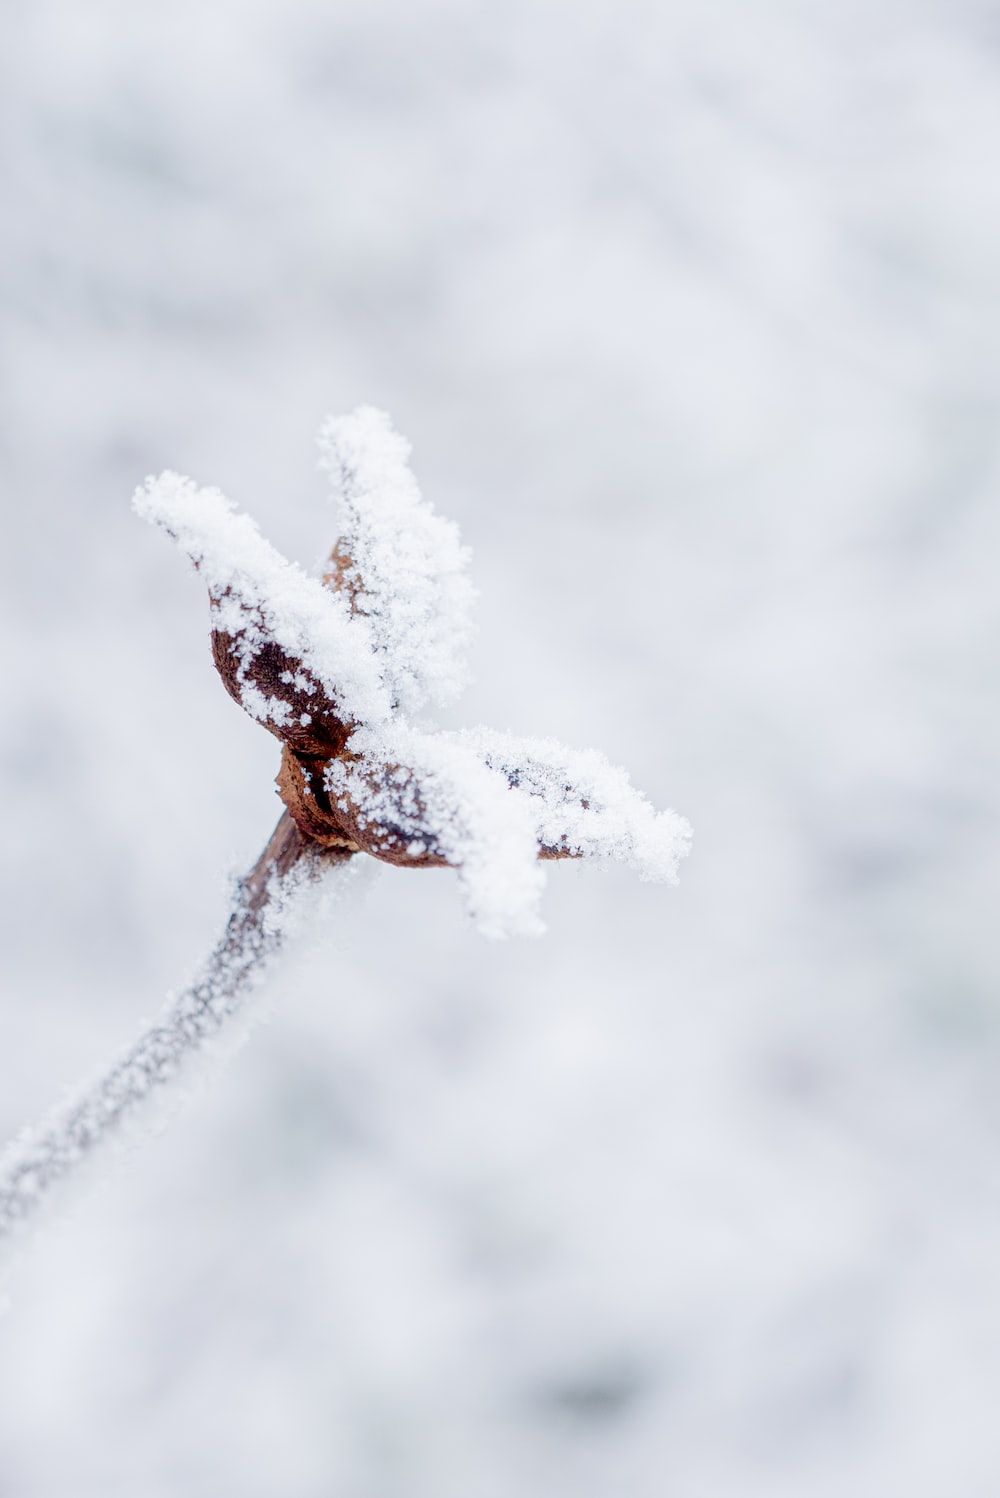 A close up of a branch covered in snow - Winter